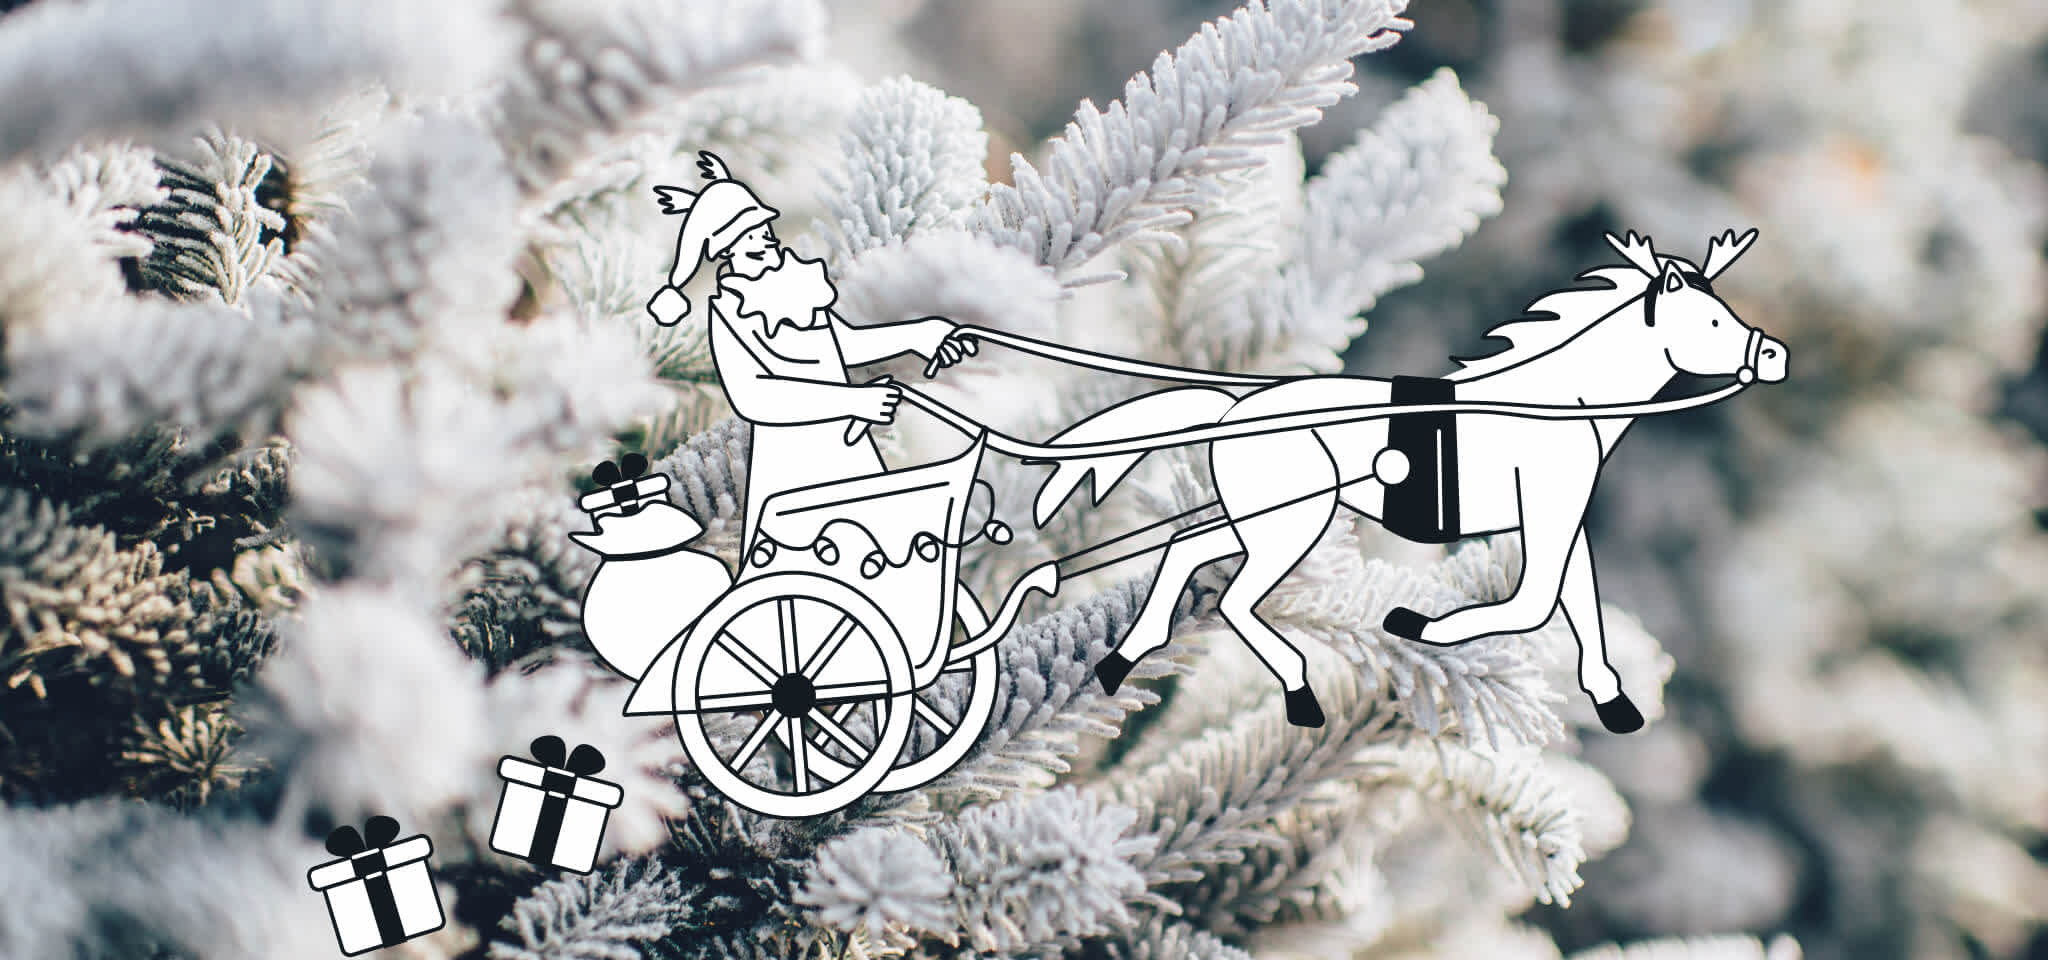 Hermes riding a sleigh in snow